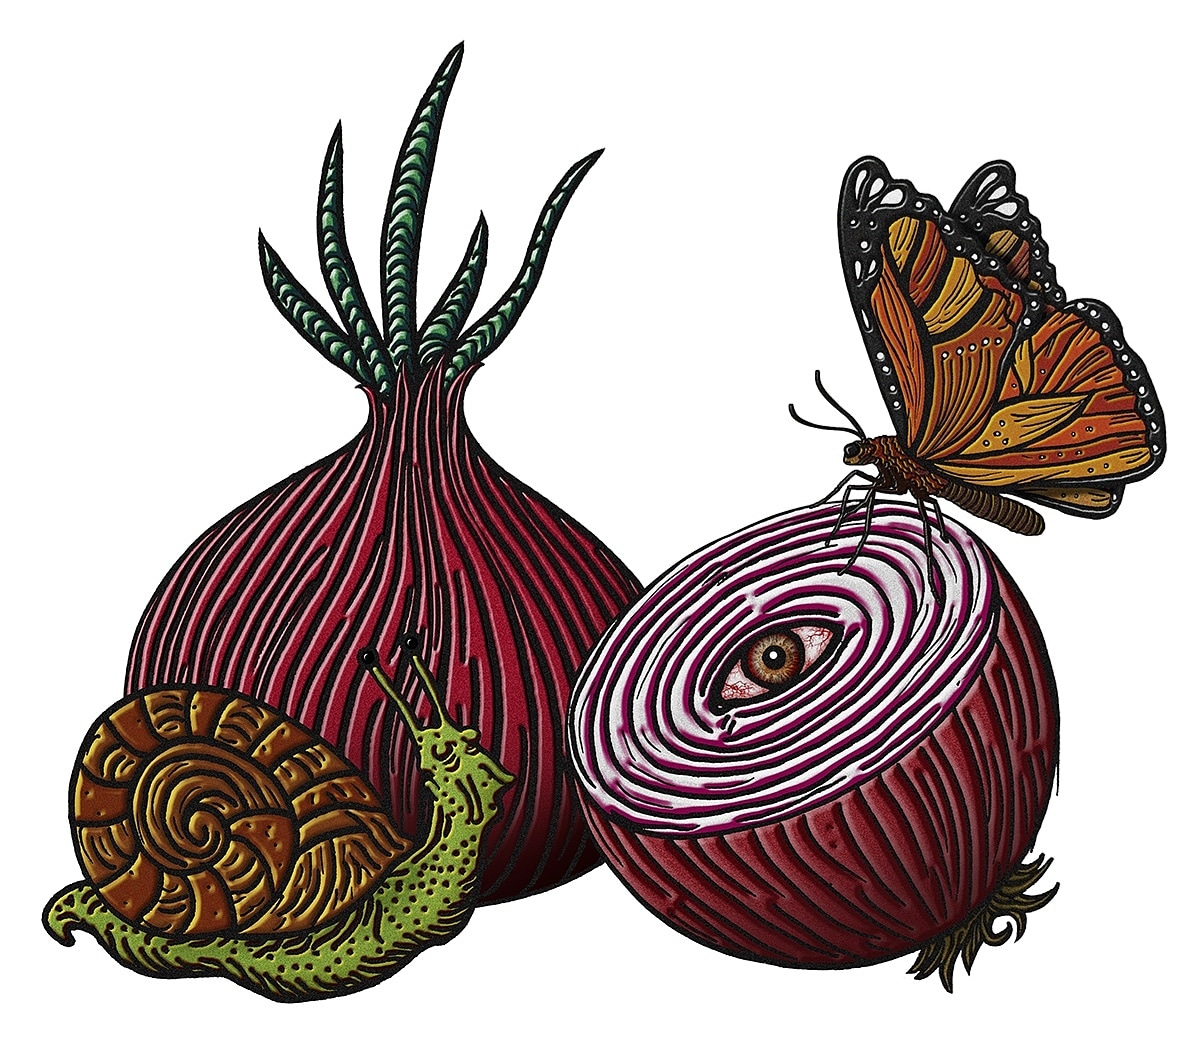 Onion Drawing Realistic Sketch